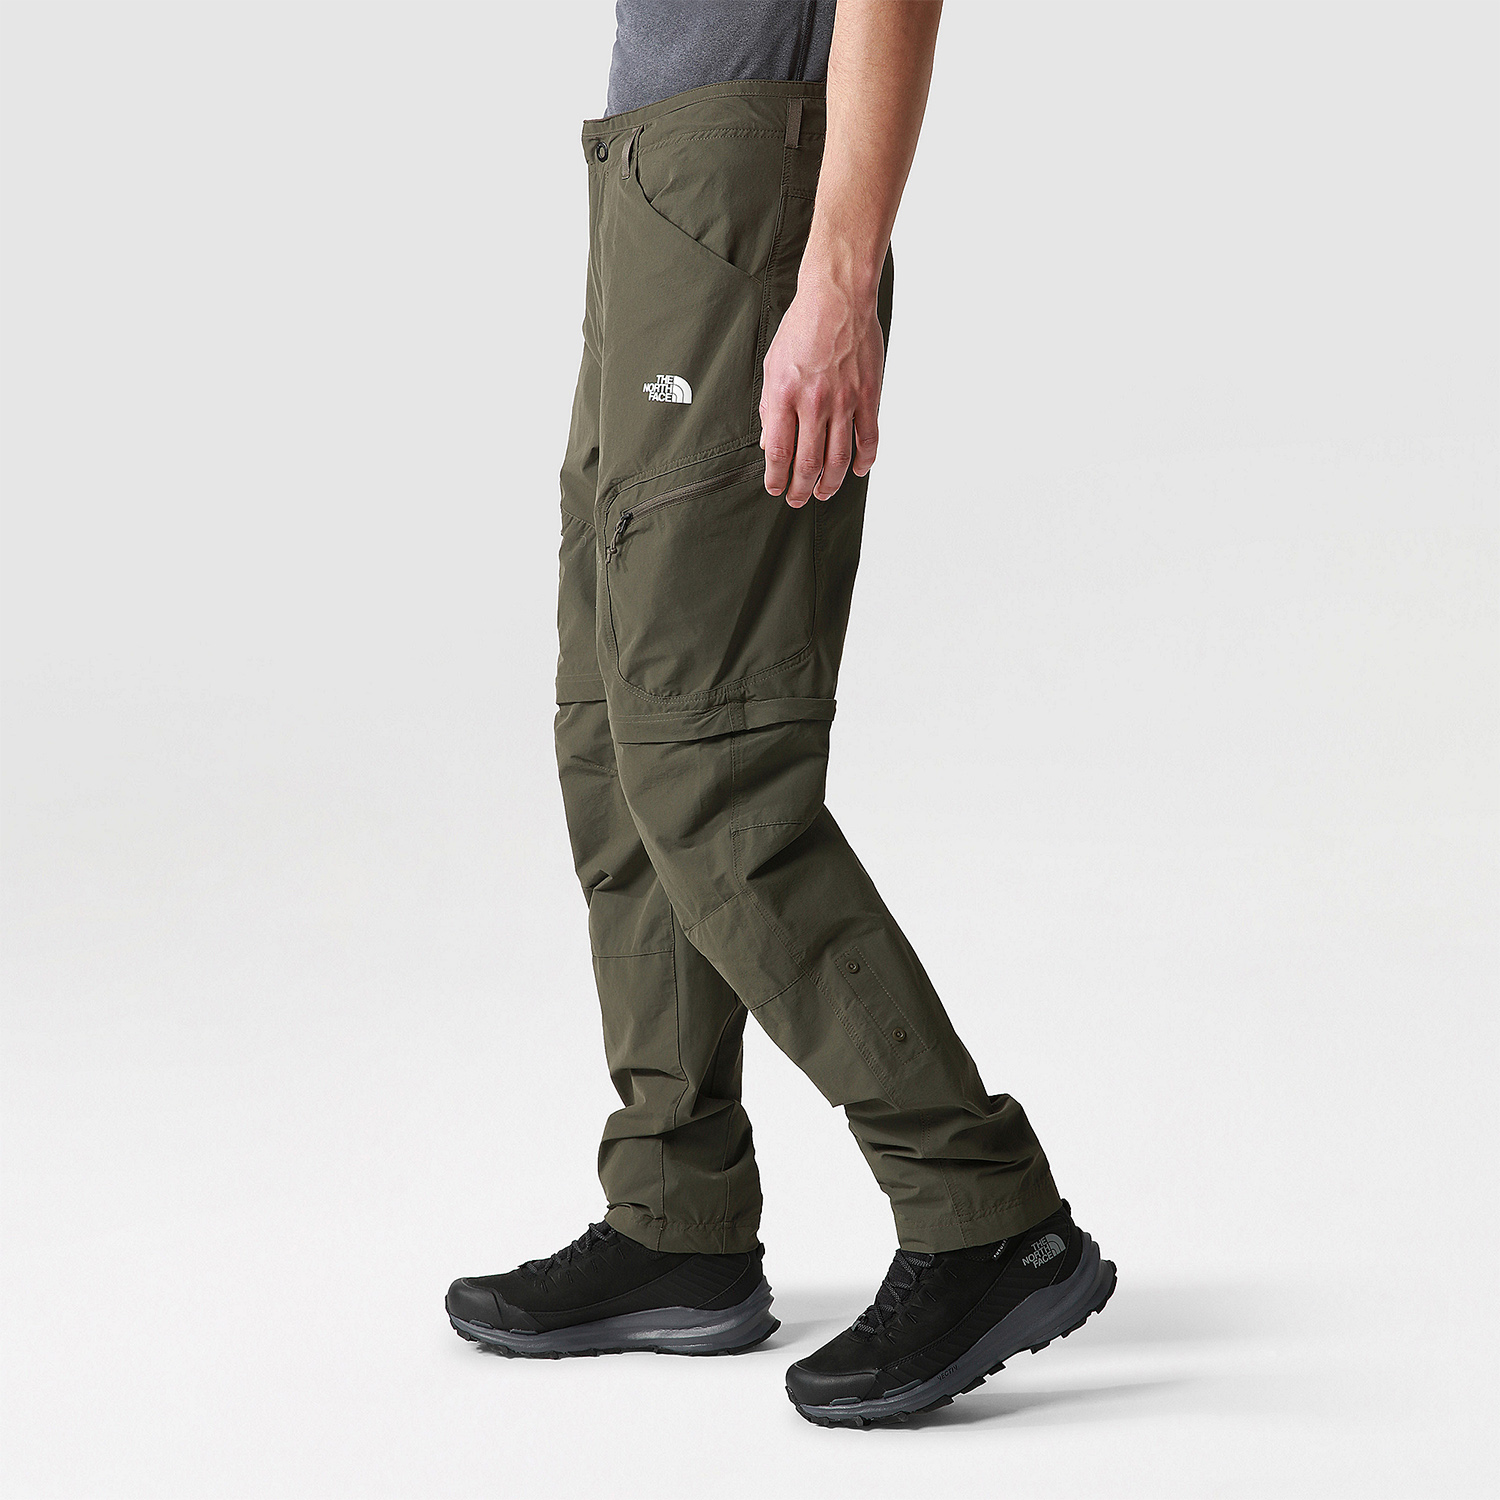 The North Face Exploration Pants - New Taupe Green